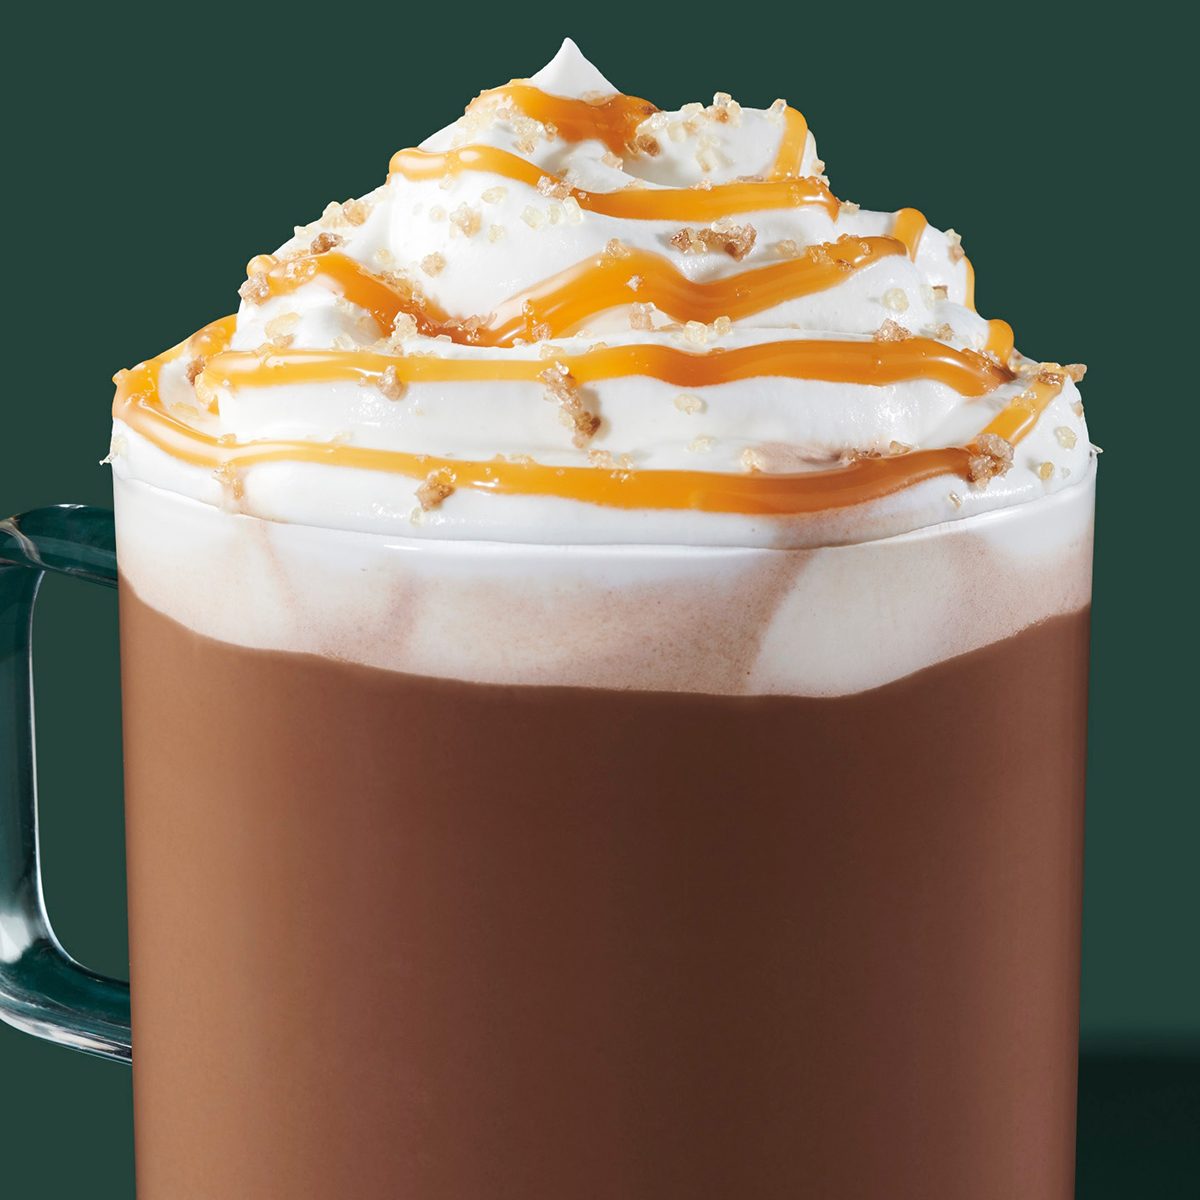 8 "LimitedEdition" Starbucks Drinks That You Can Still Order